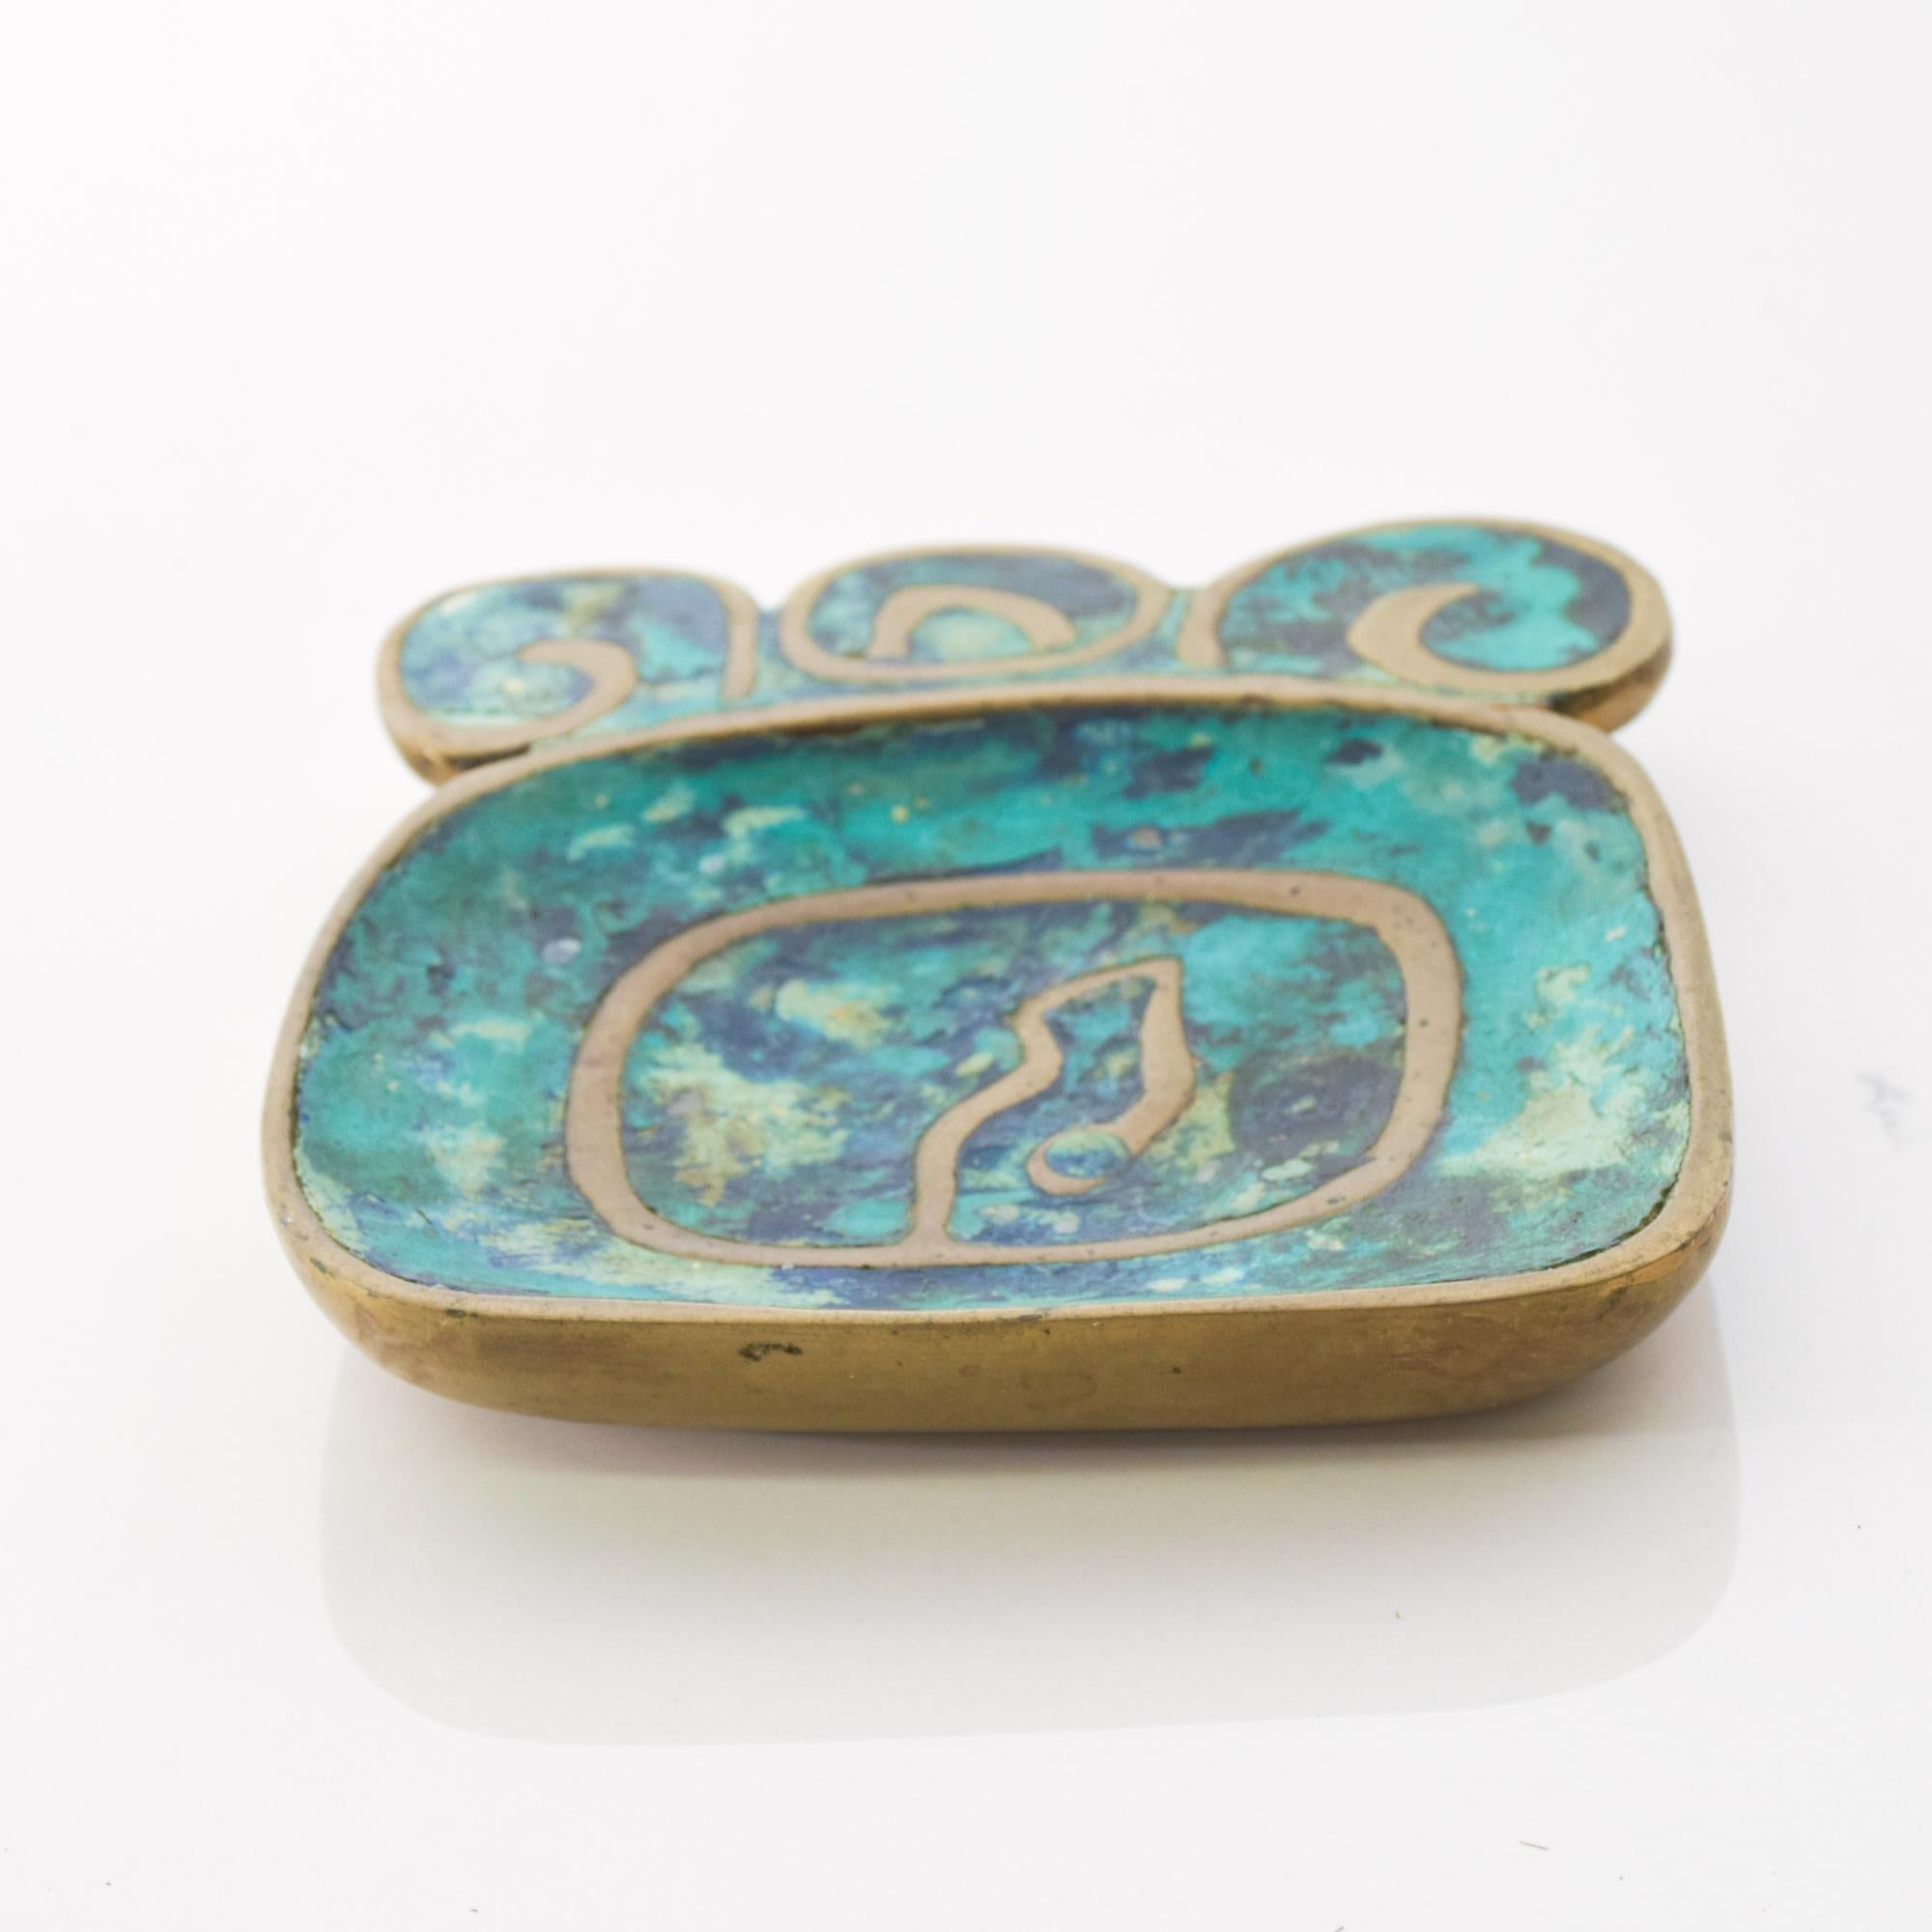 1950s Mexico Pepe Mendoza collectible art vibrant sea of aqua decorative dish tray catchall in malachite and bronze brass
abstract art design in a turquoise cloisonné technique.
Stamped Mendoza made in Mexico
Measures: 4 3/8